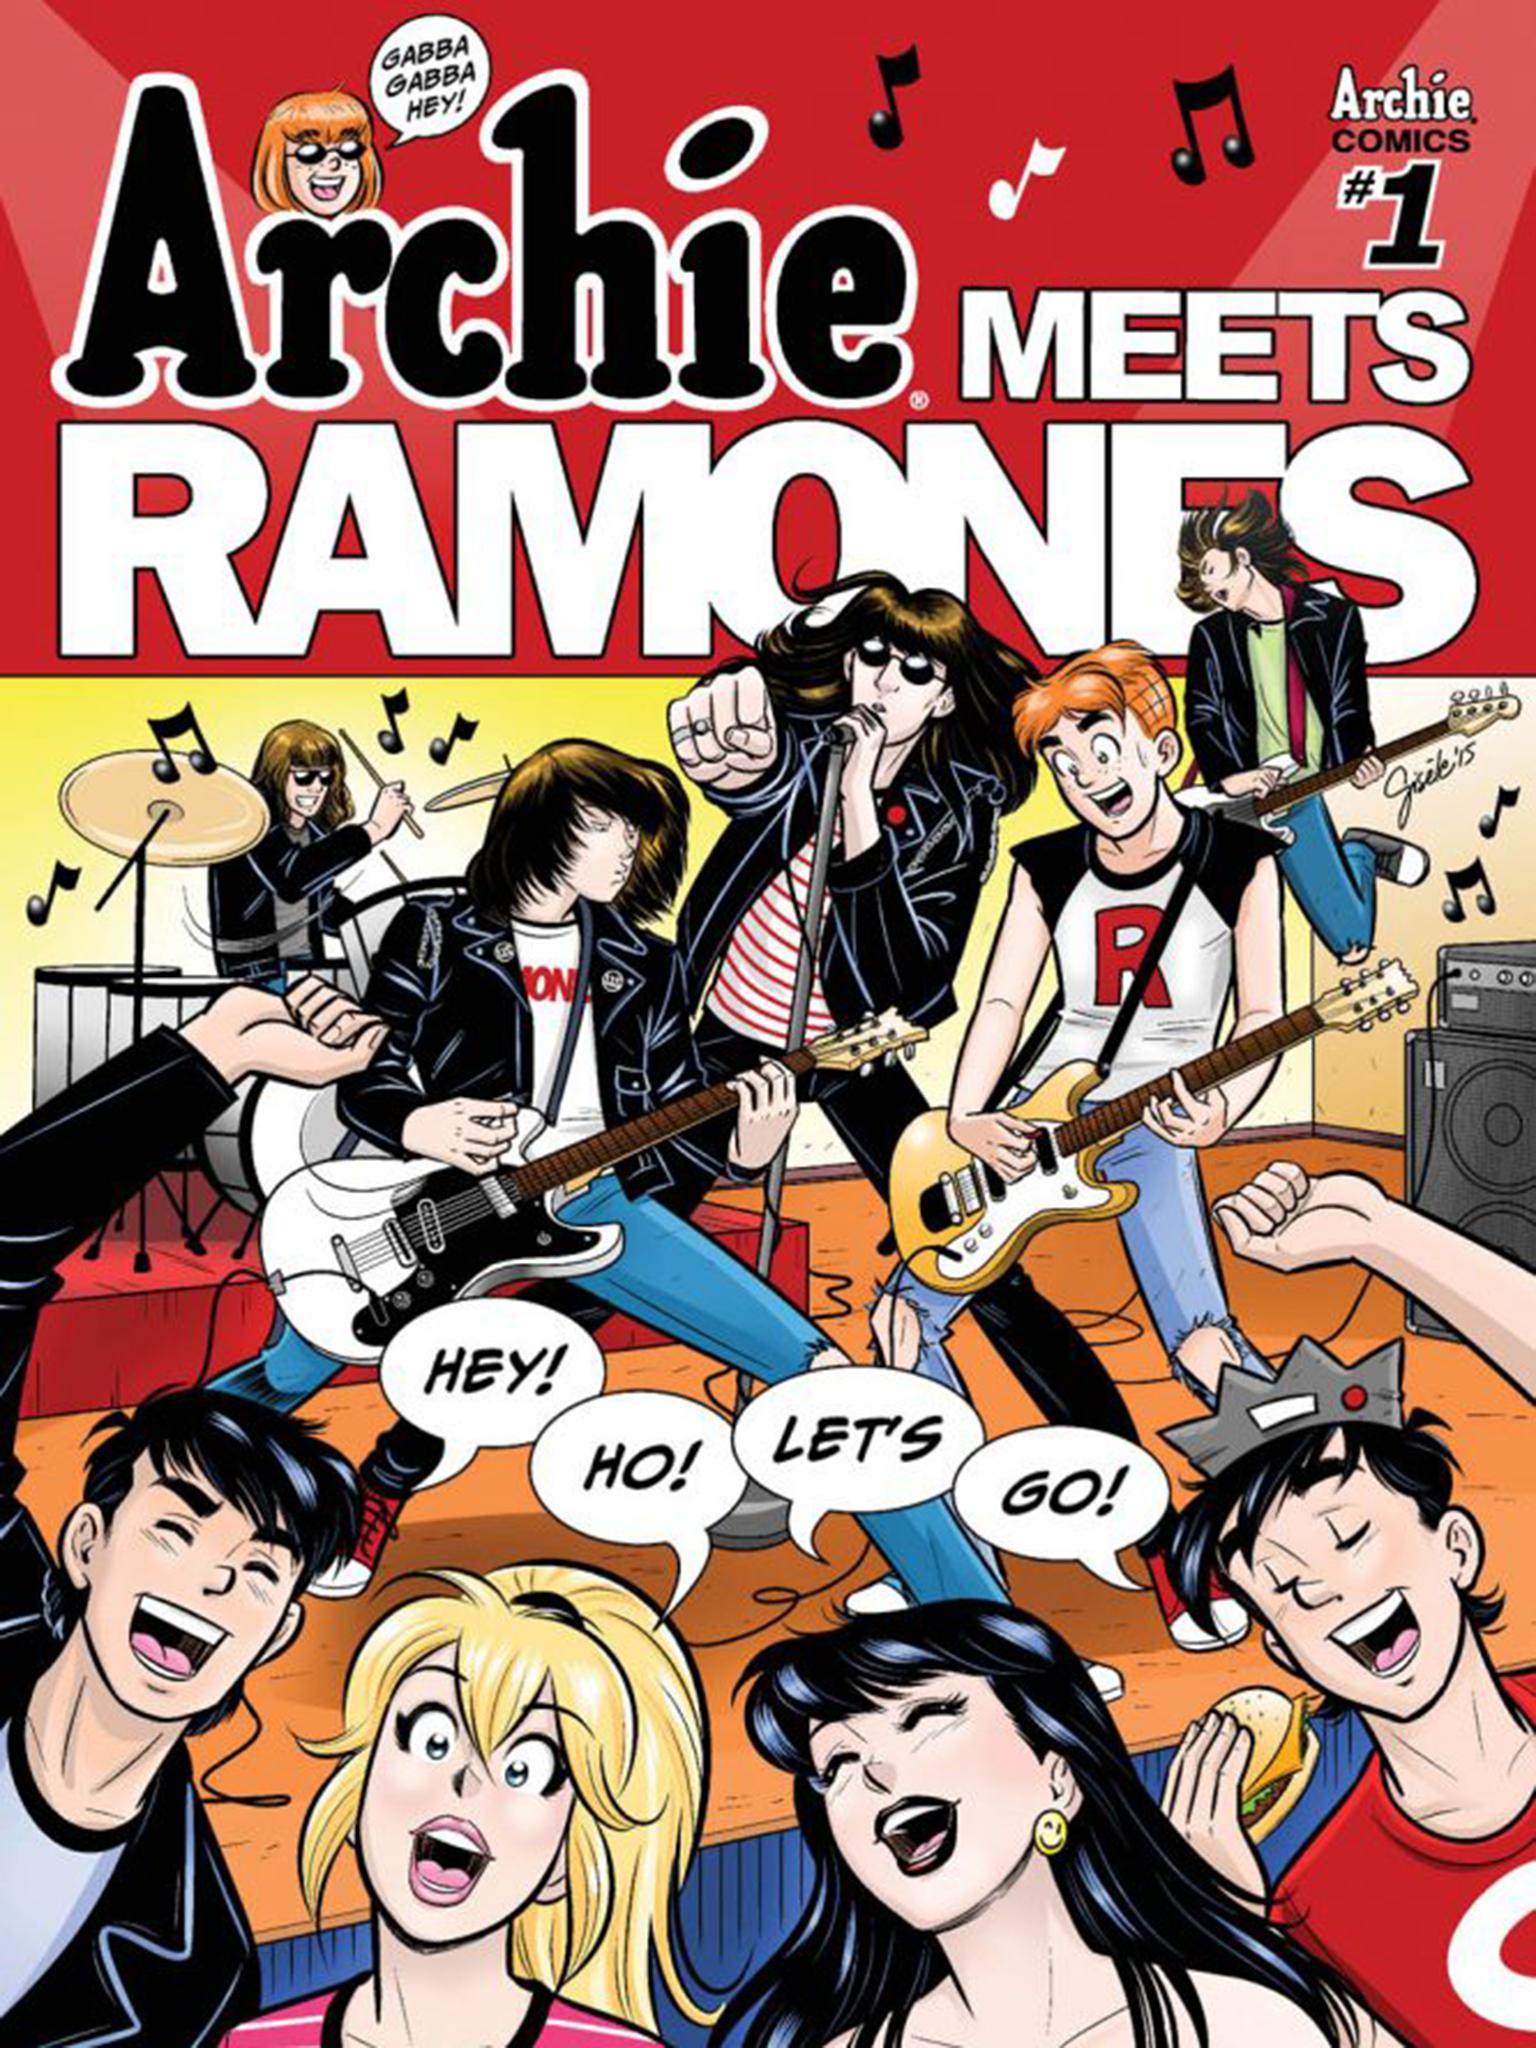 Two mainstays of American culture come together when Archie meets the Ramones?(Archie Comics)